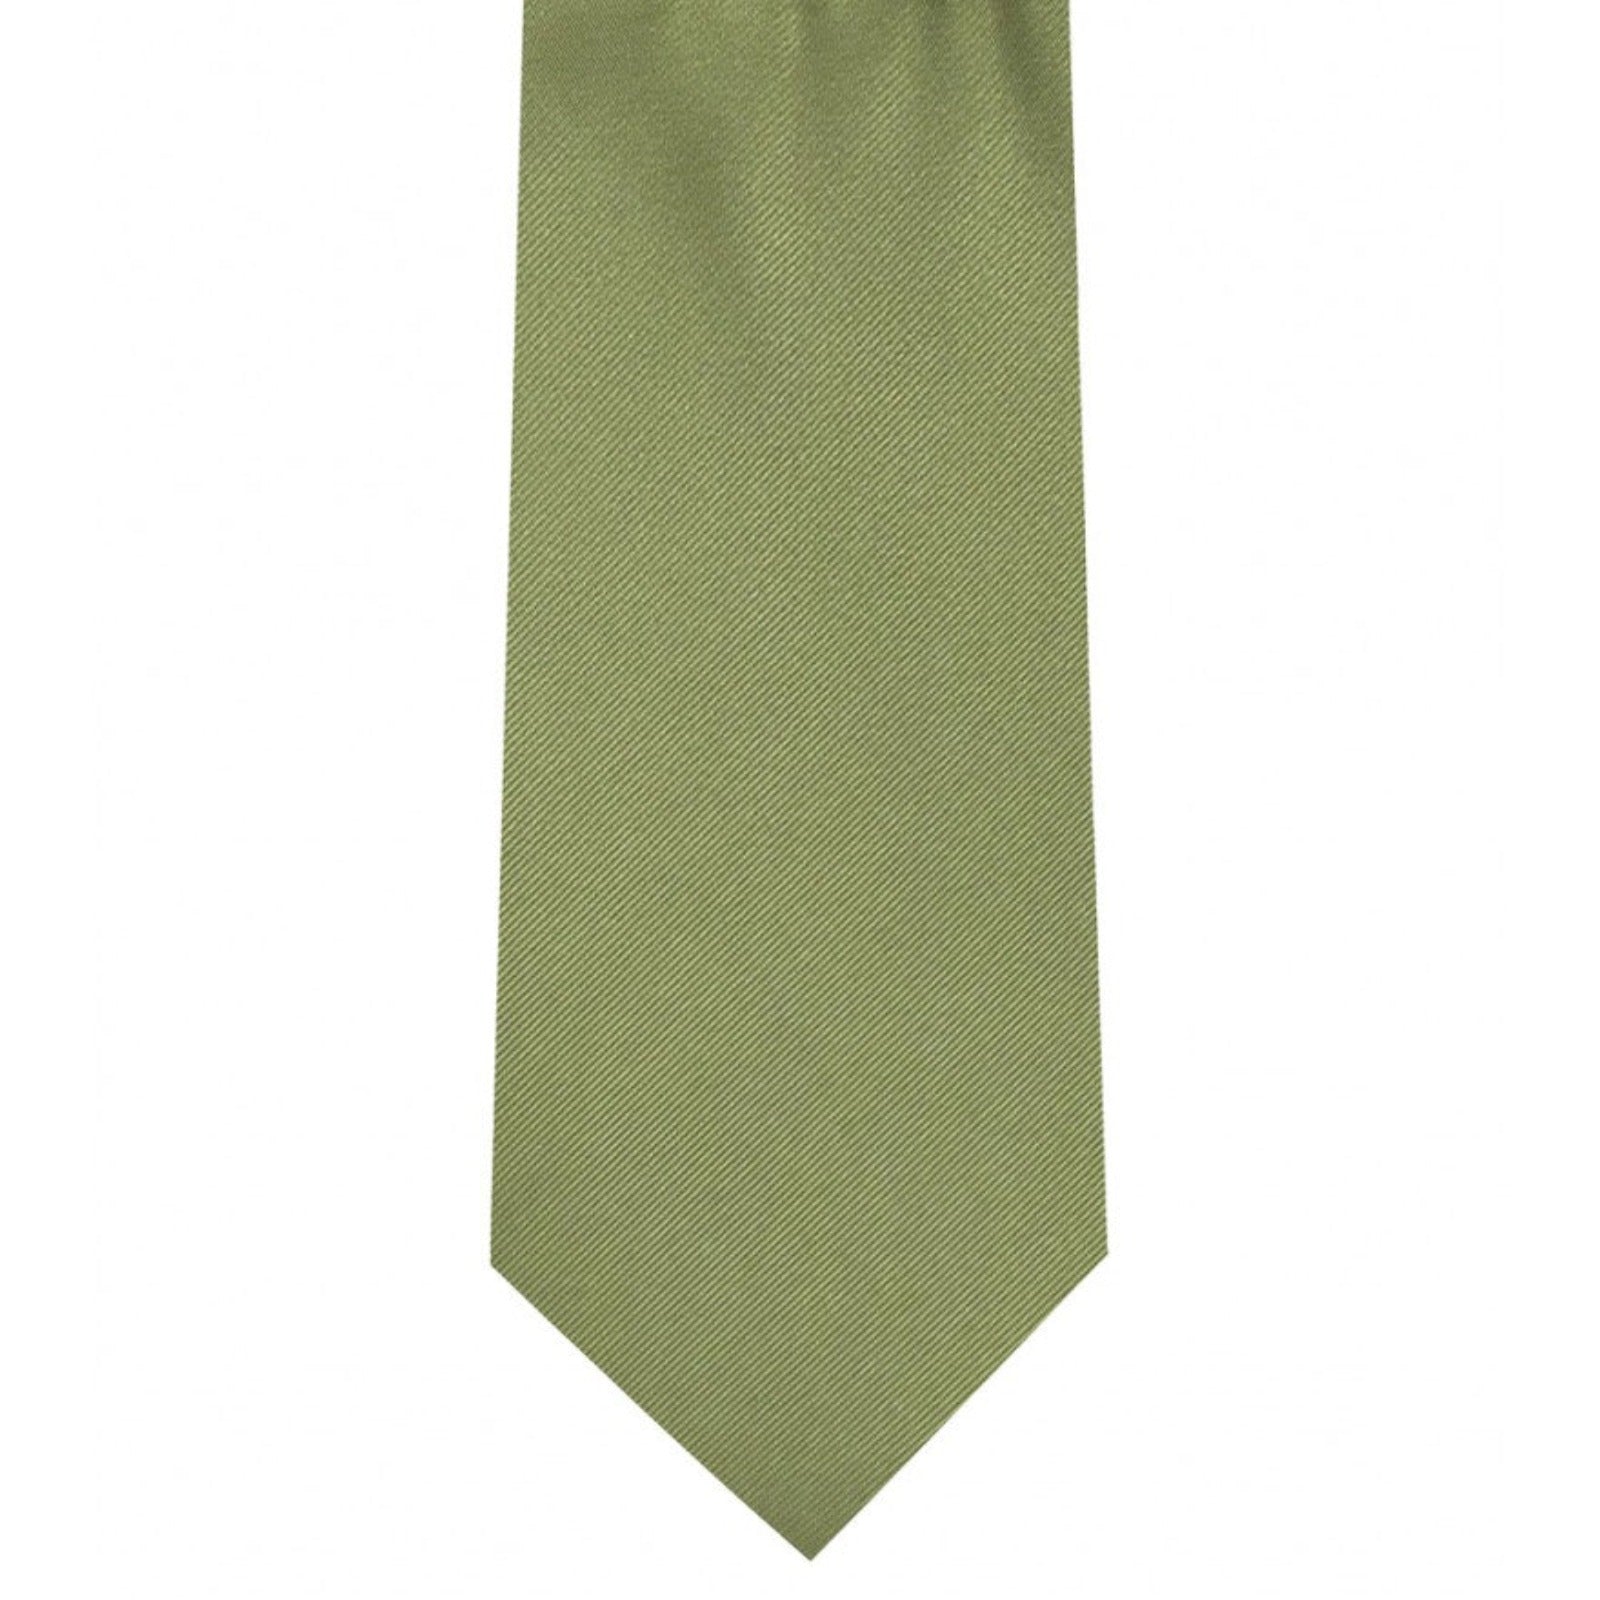 Classic Olive Green Tie Ultra Skinny tie width 2.25 inches With Matching Pocket Square | KCT Menswear